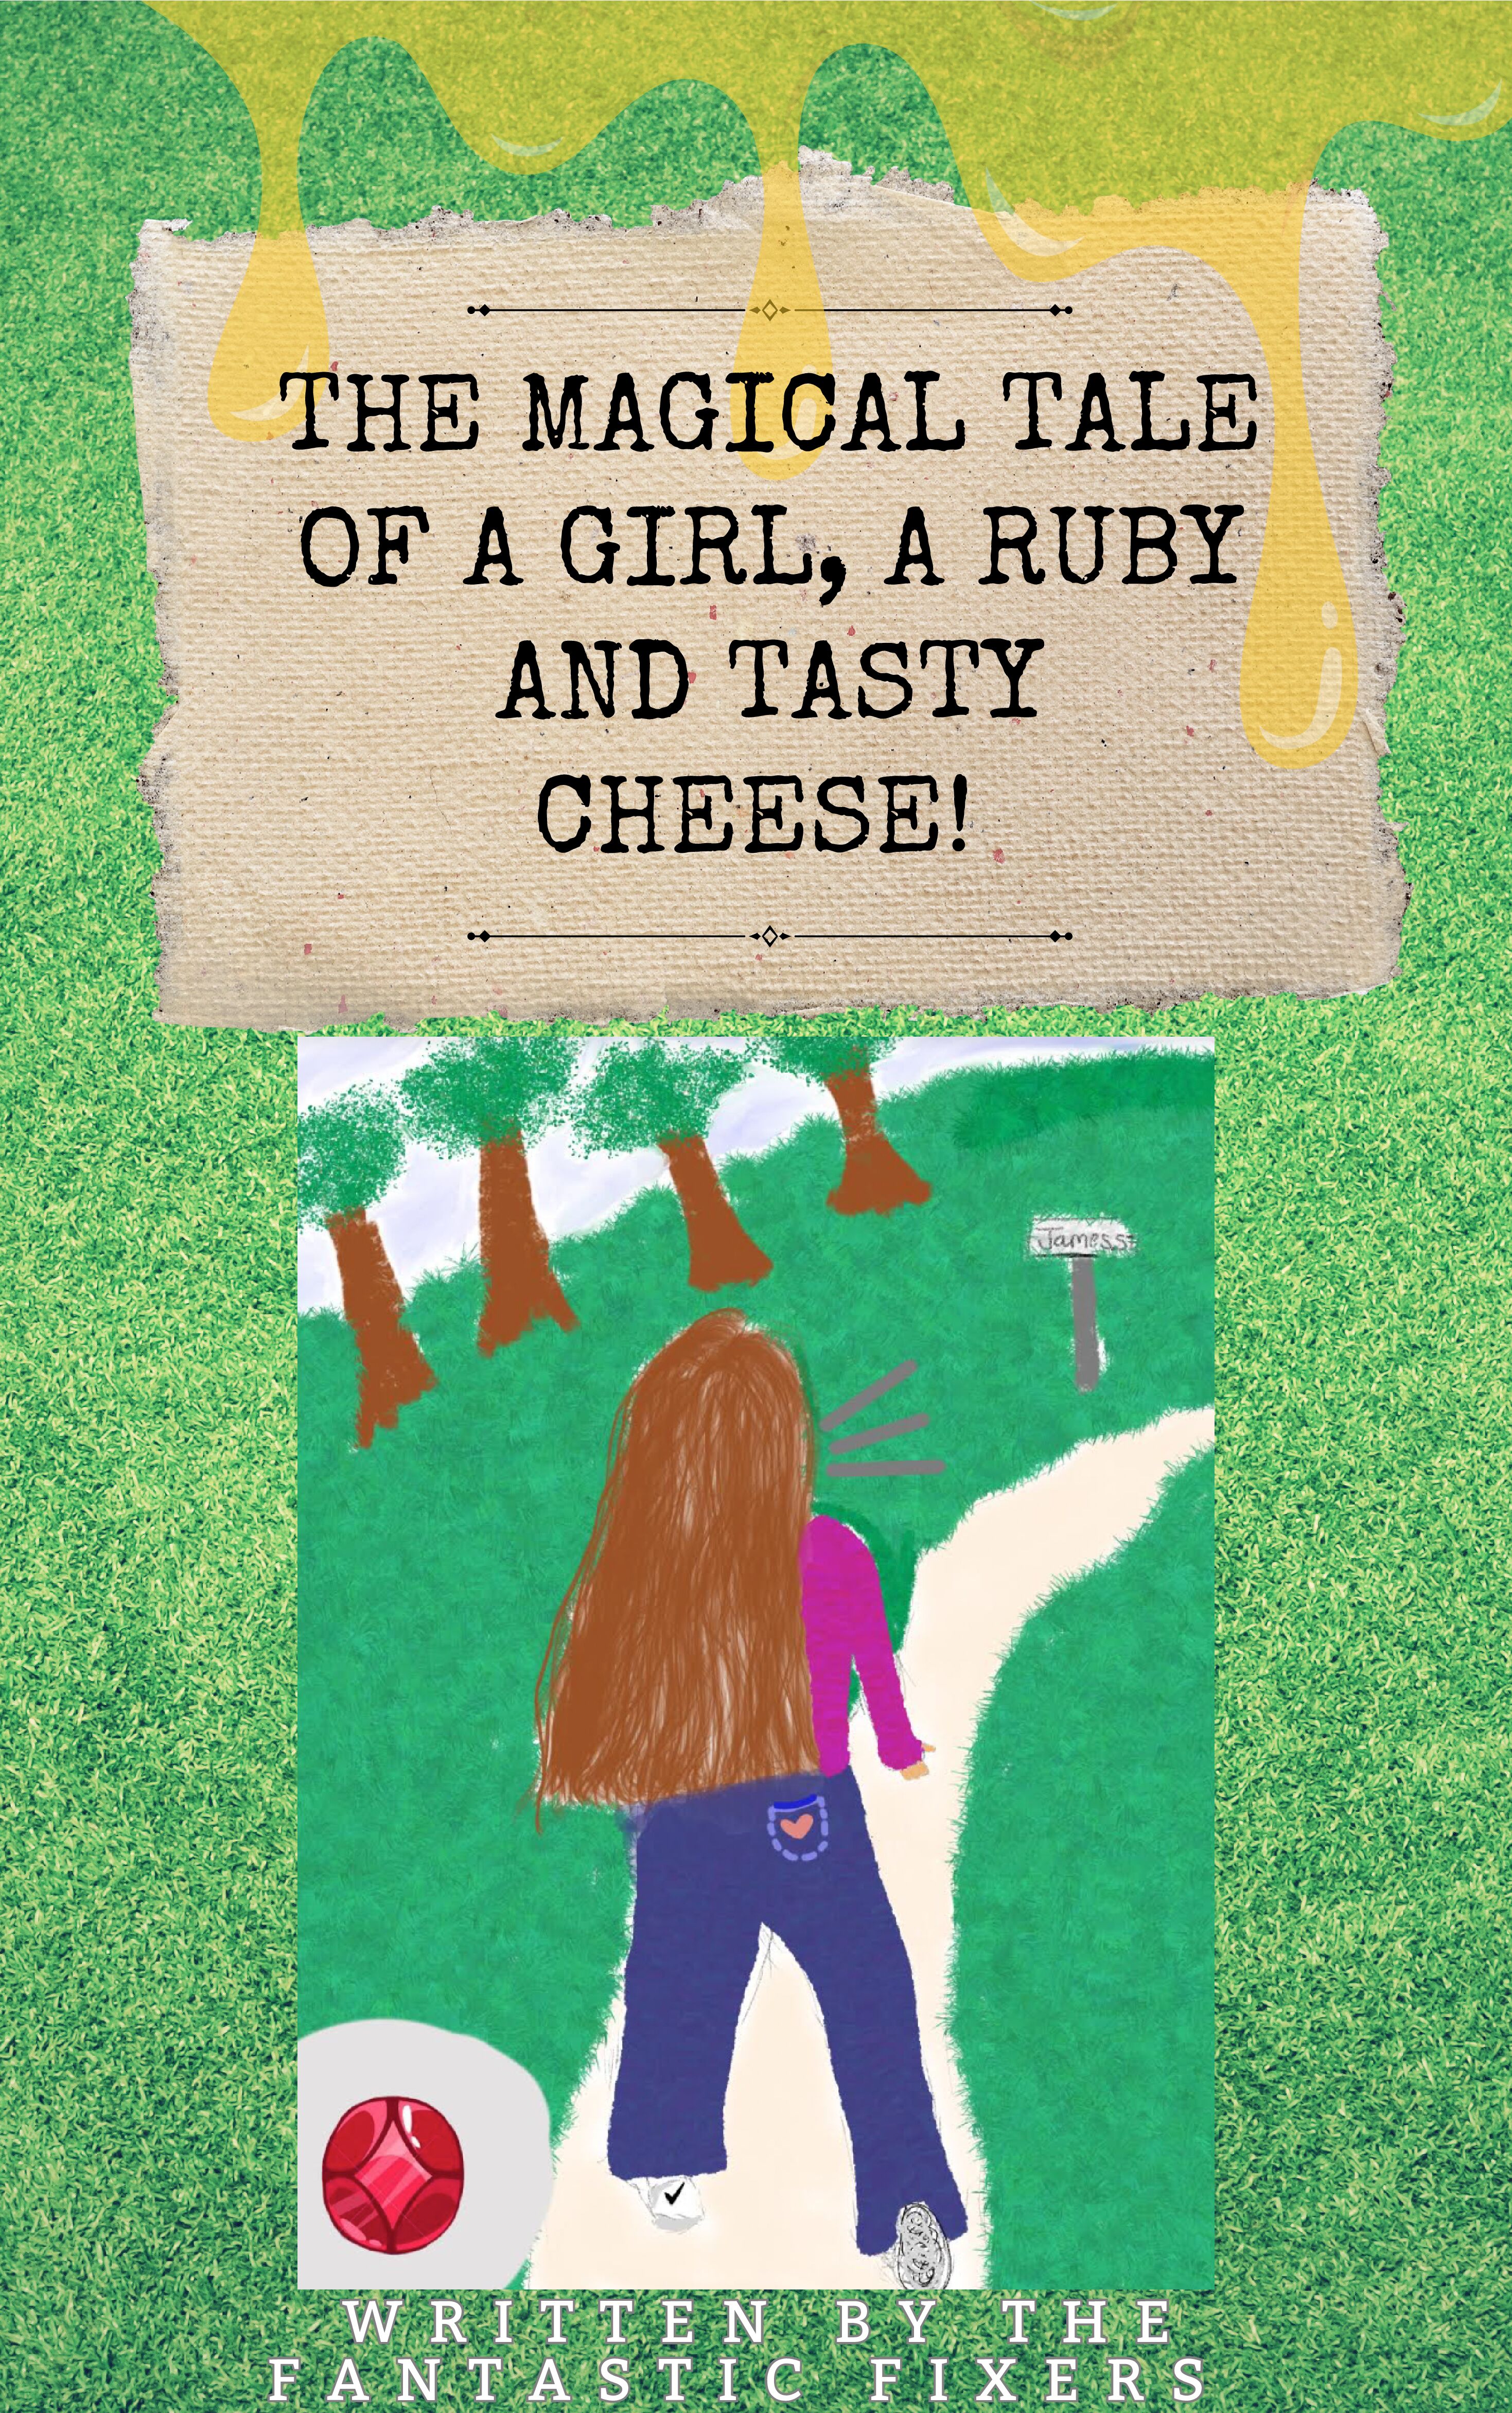 The Magical Tale of a girl, a ruby and tasty cheese